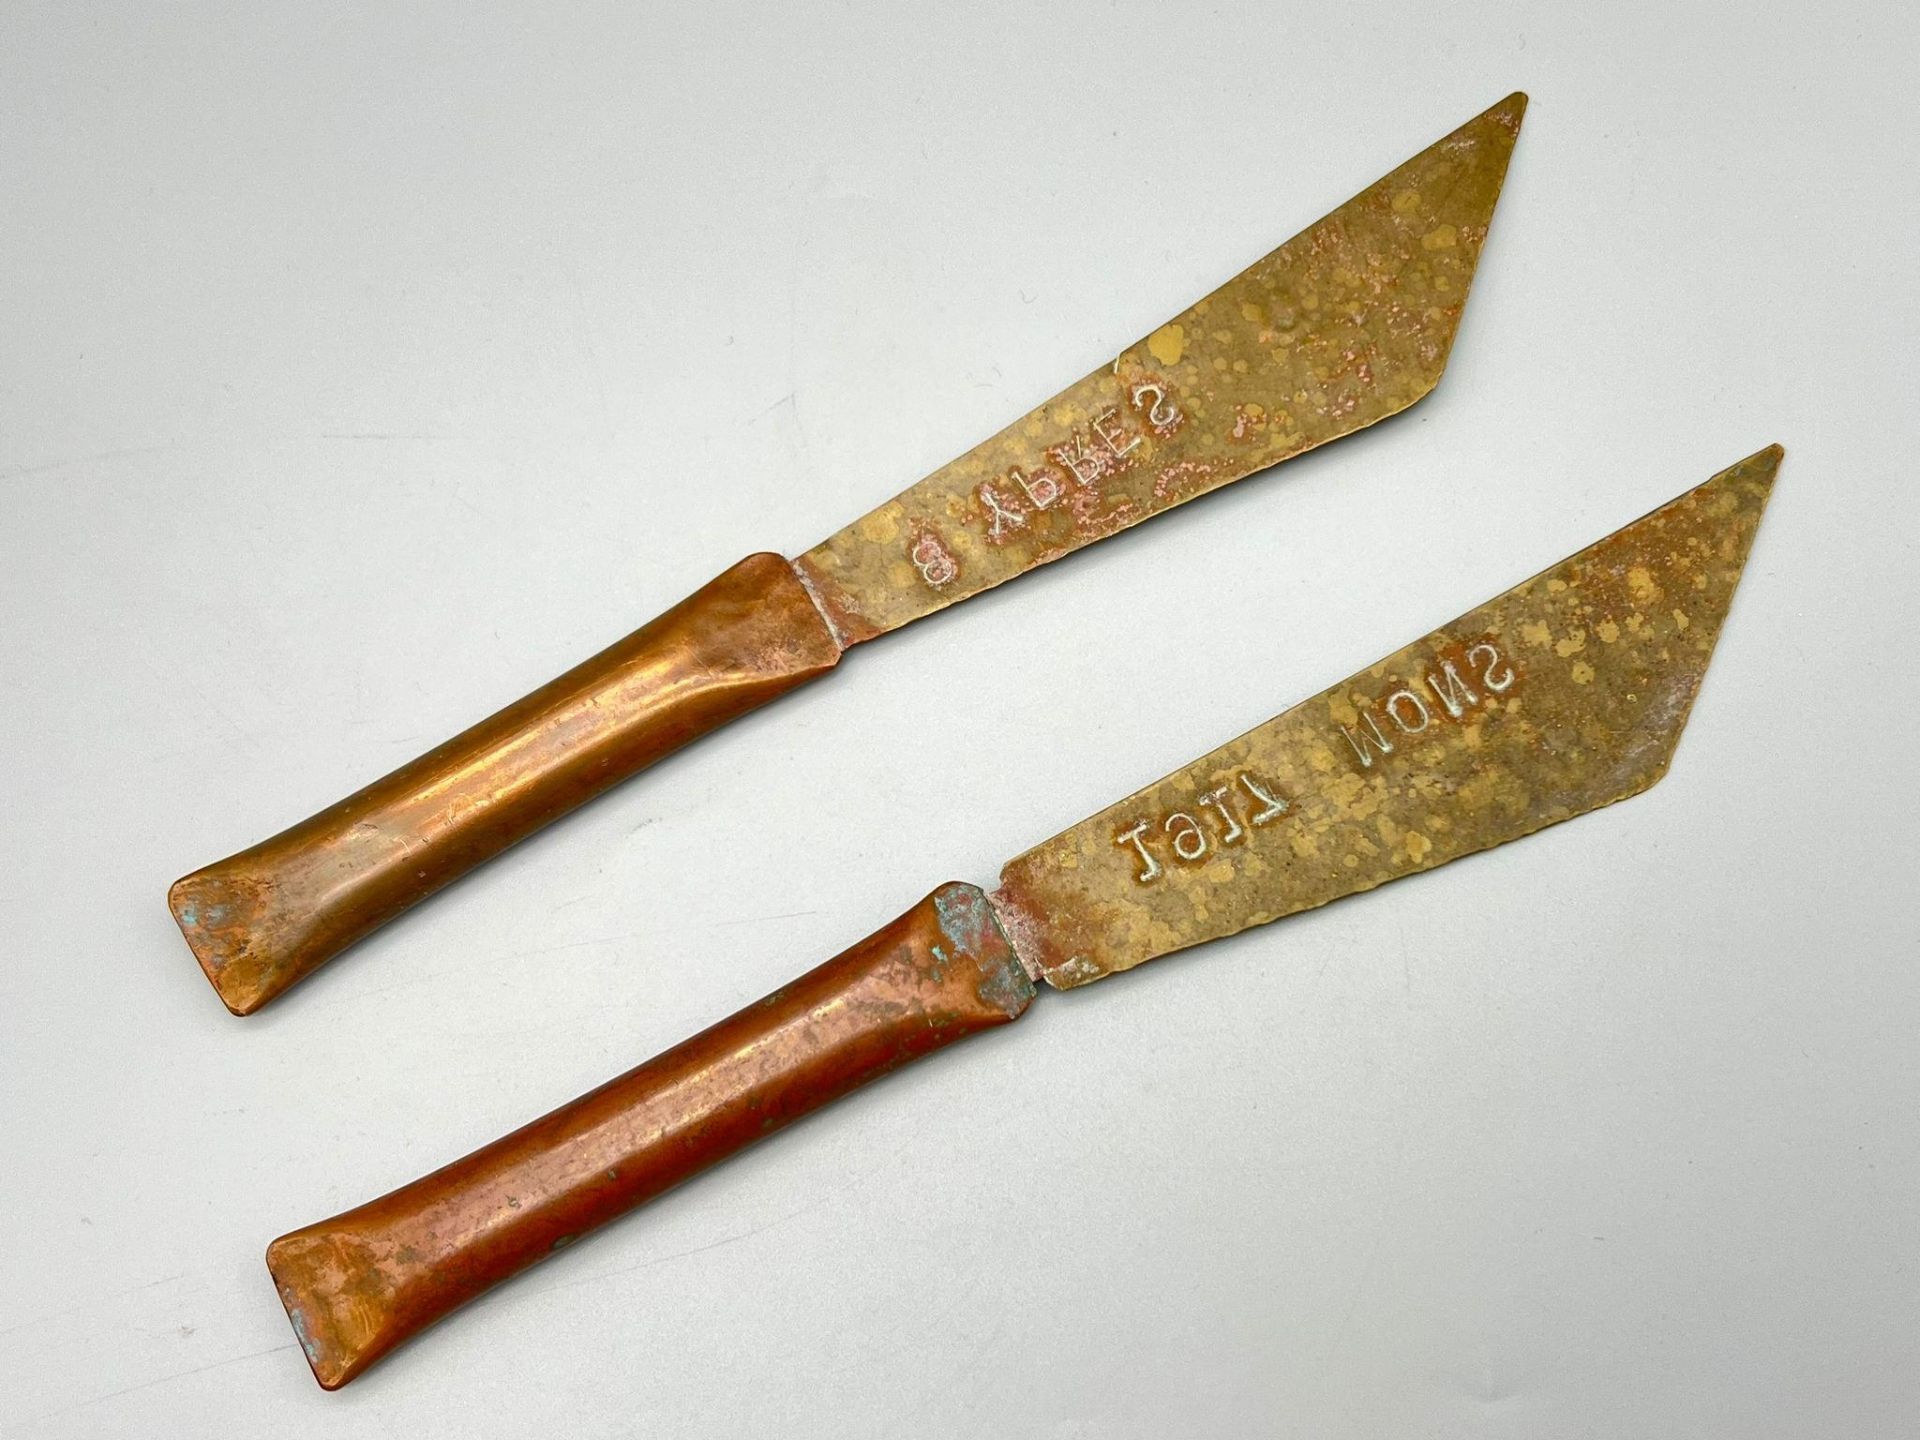 2 Pieces of Trench Art, One For 1917 Mons and The other for Ypres. Each is25cm in length. - Image 3 of 3